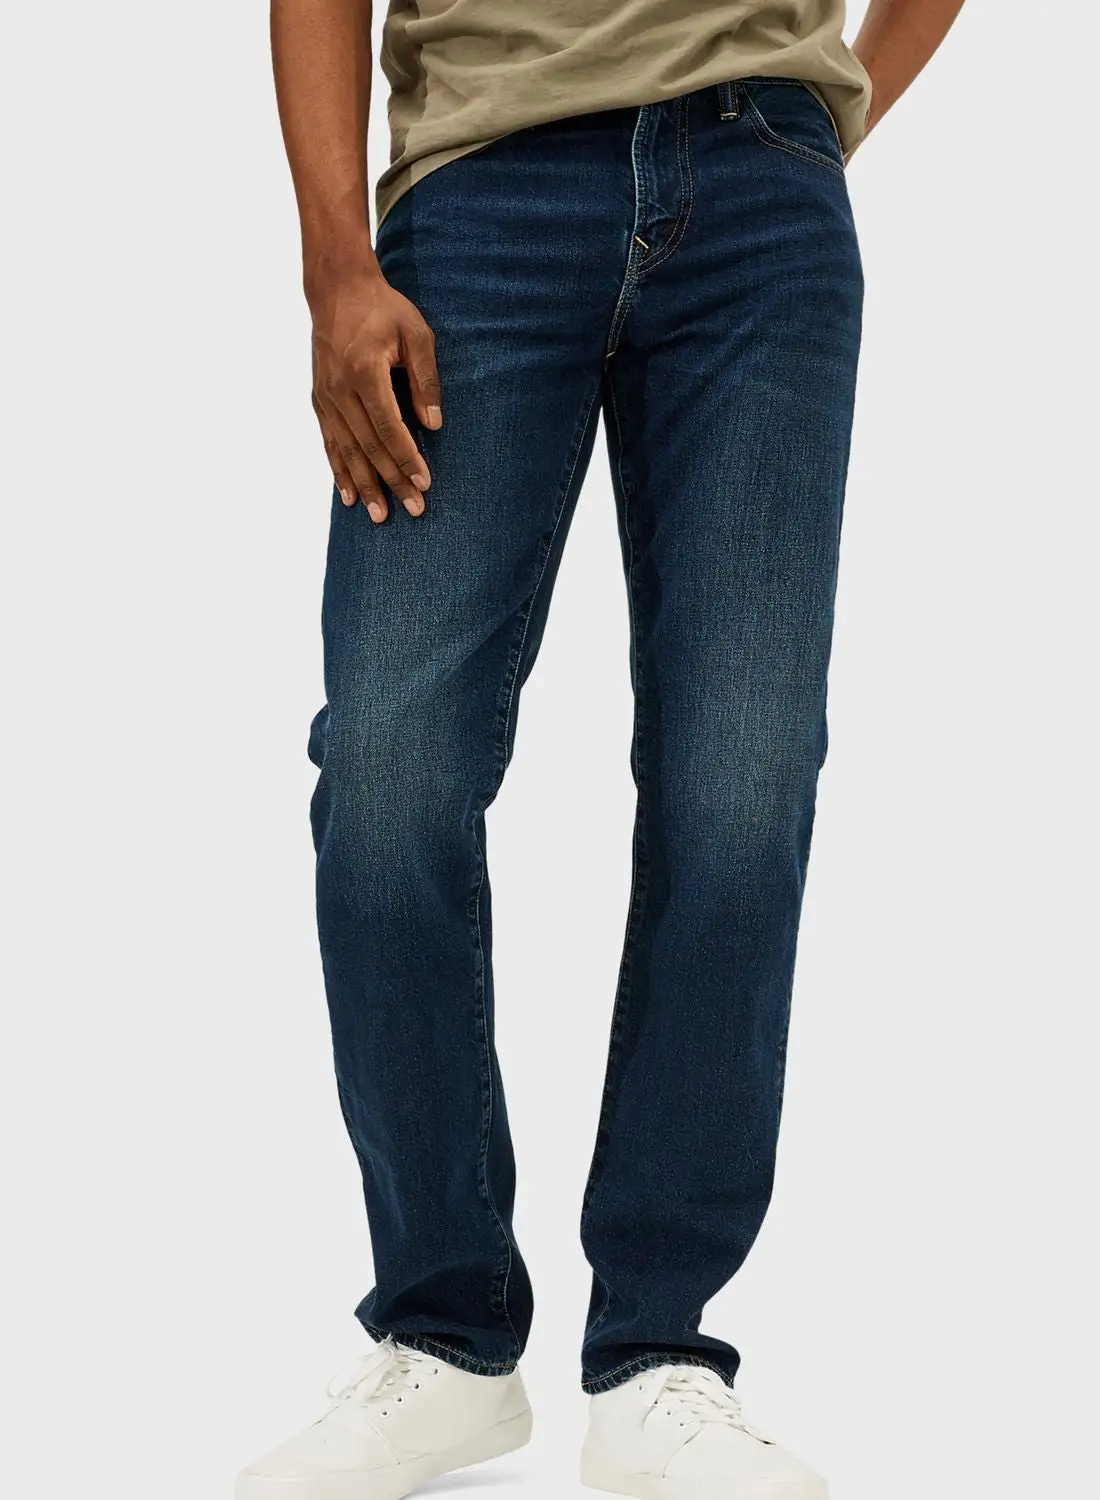 American Eagle Dark Wash Straight Fit Jeans